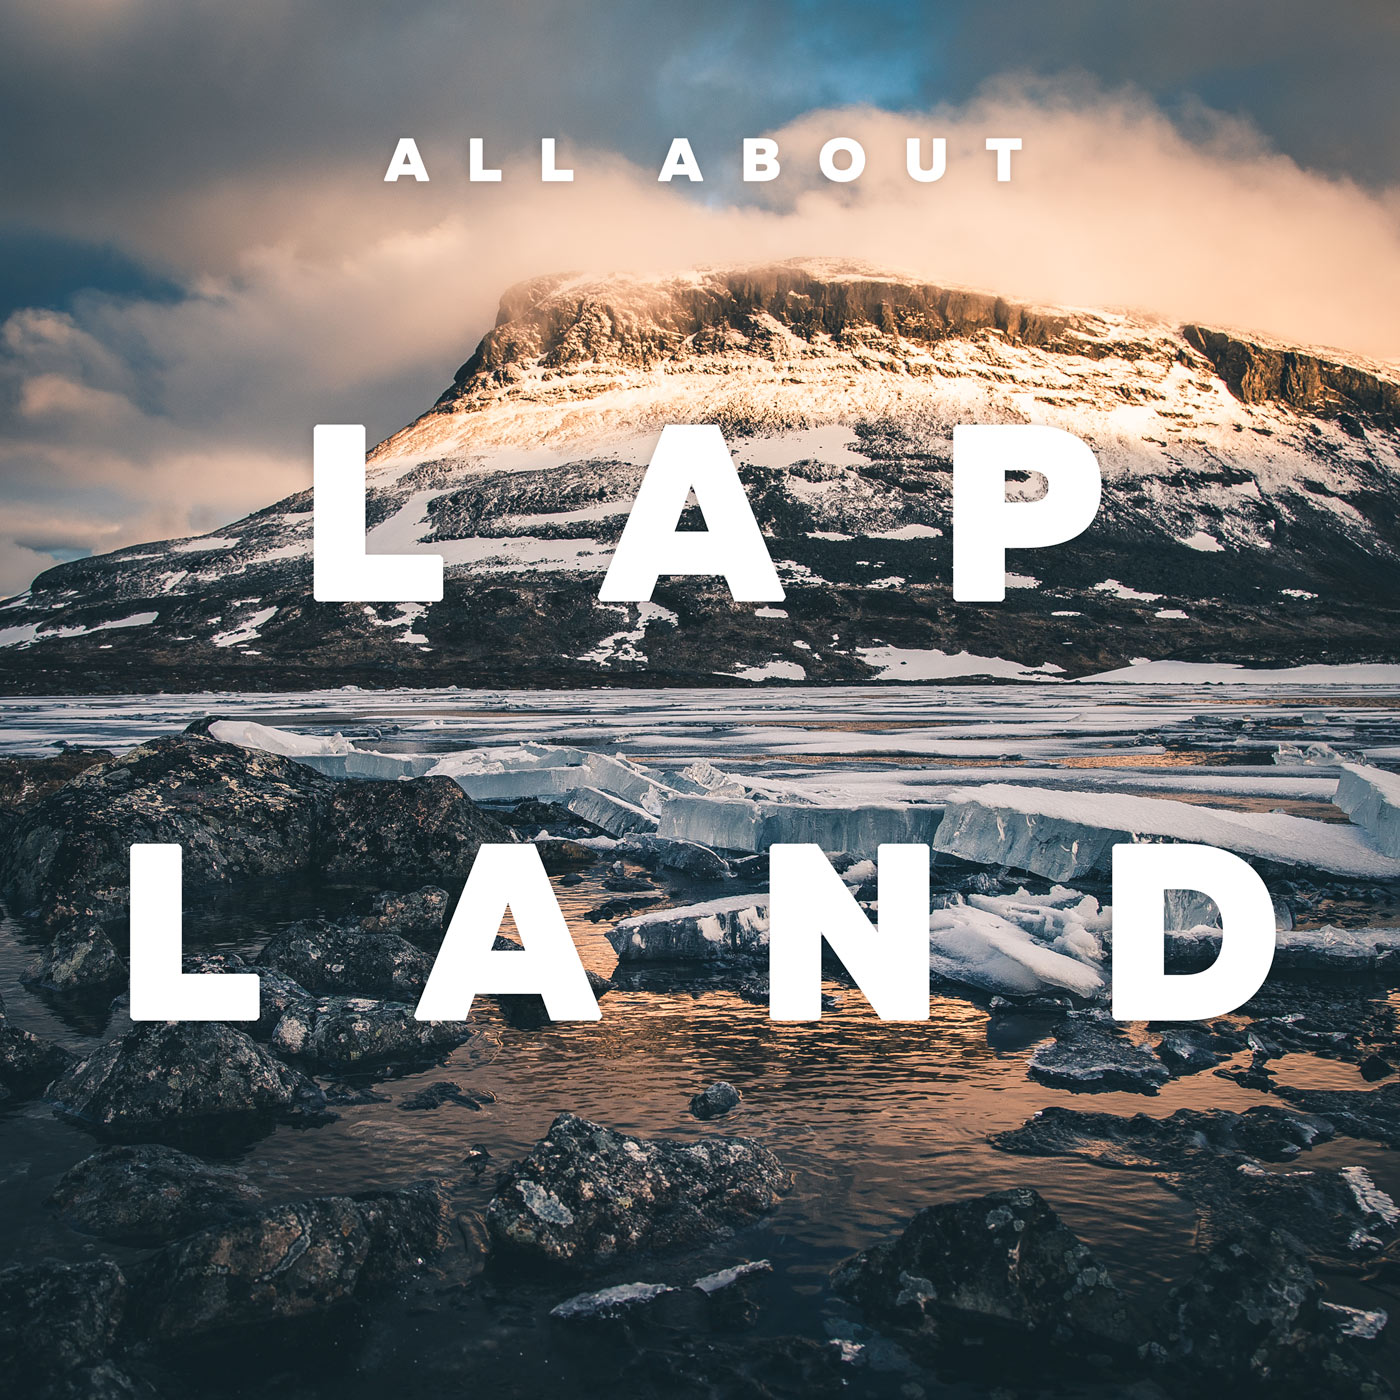 All About Lapland